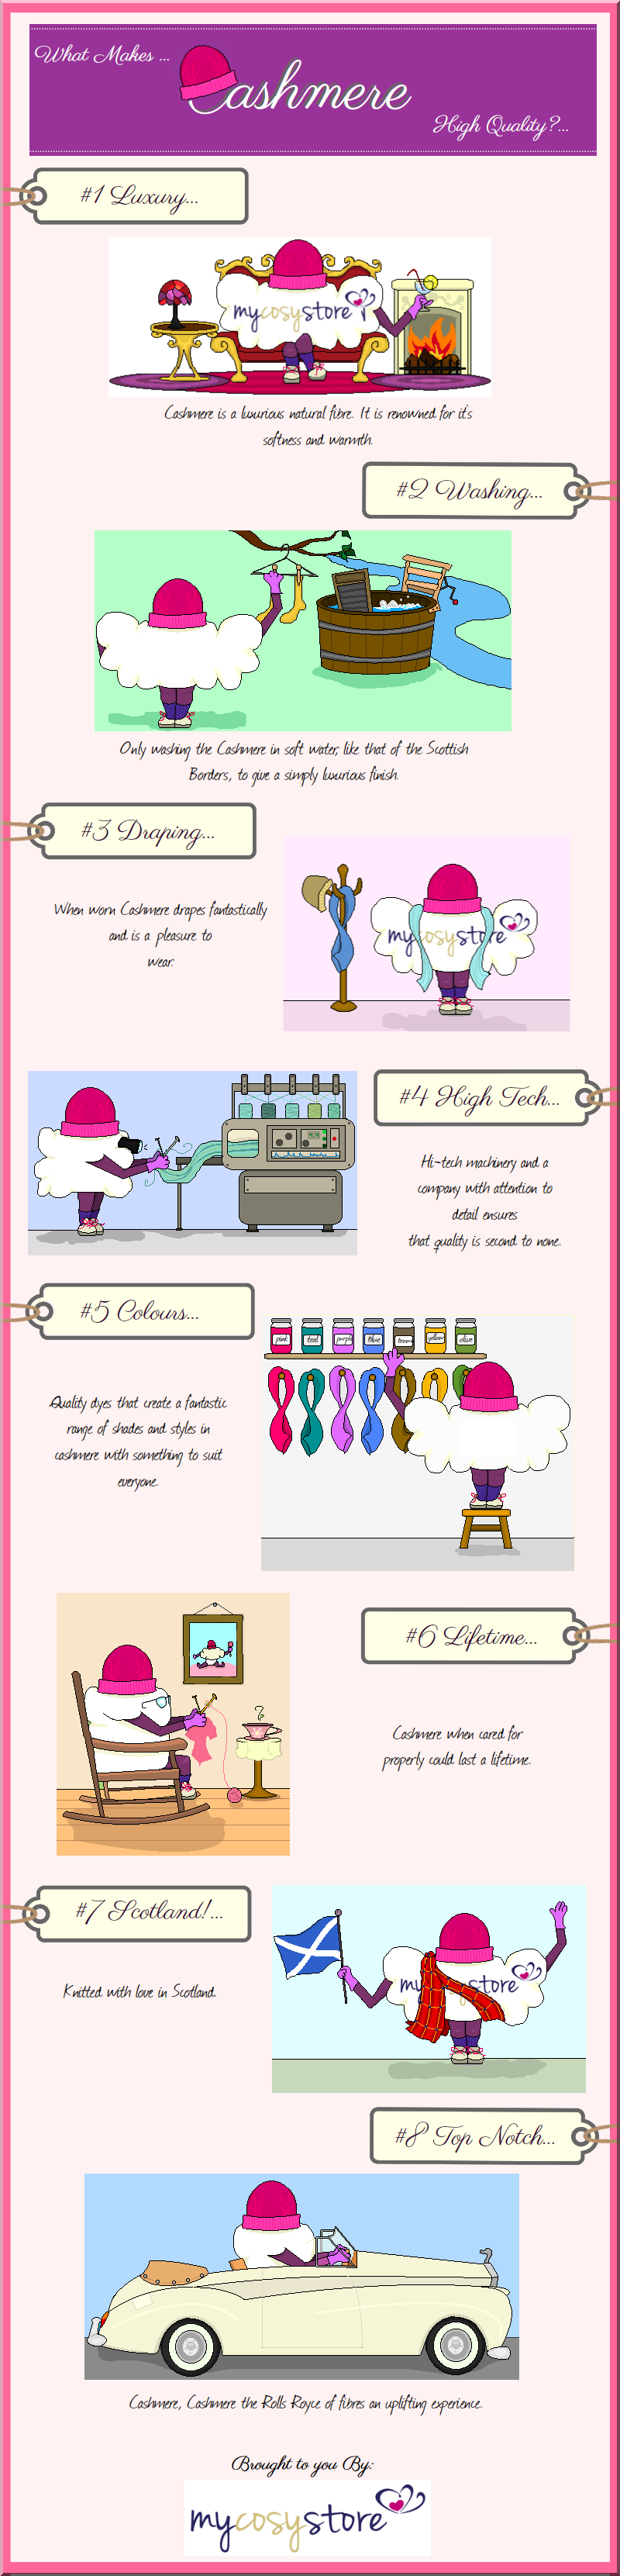 Cosy-Infographic-cashmere